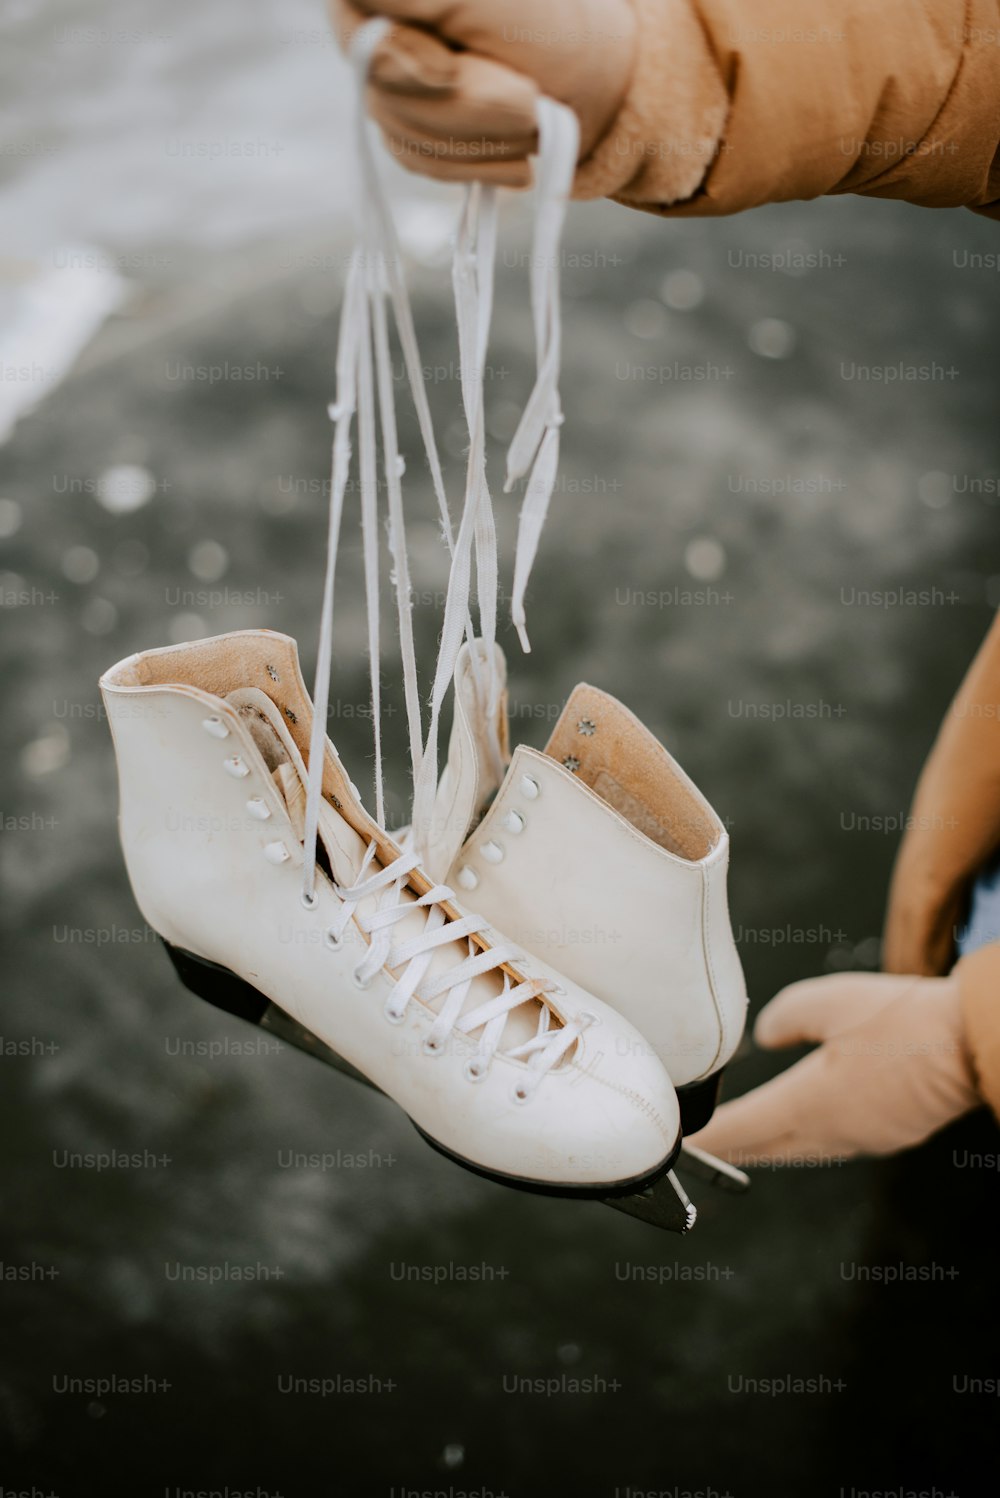 a pair of white ice skates being held by someone